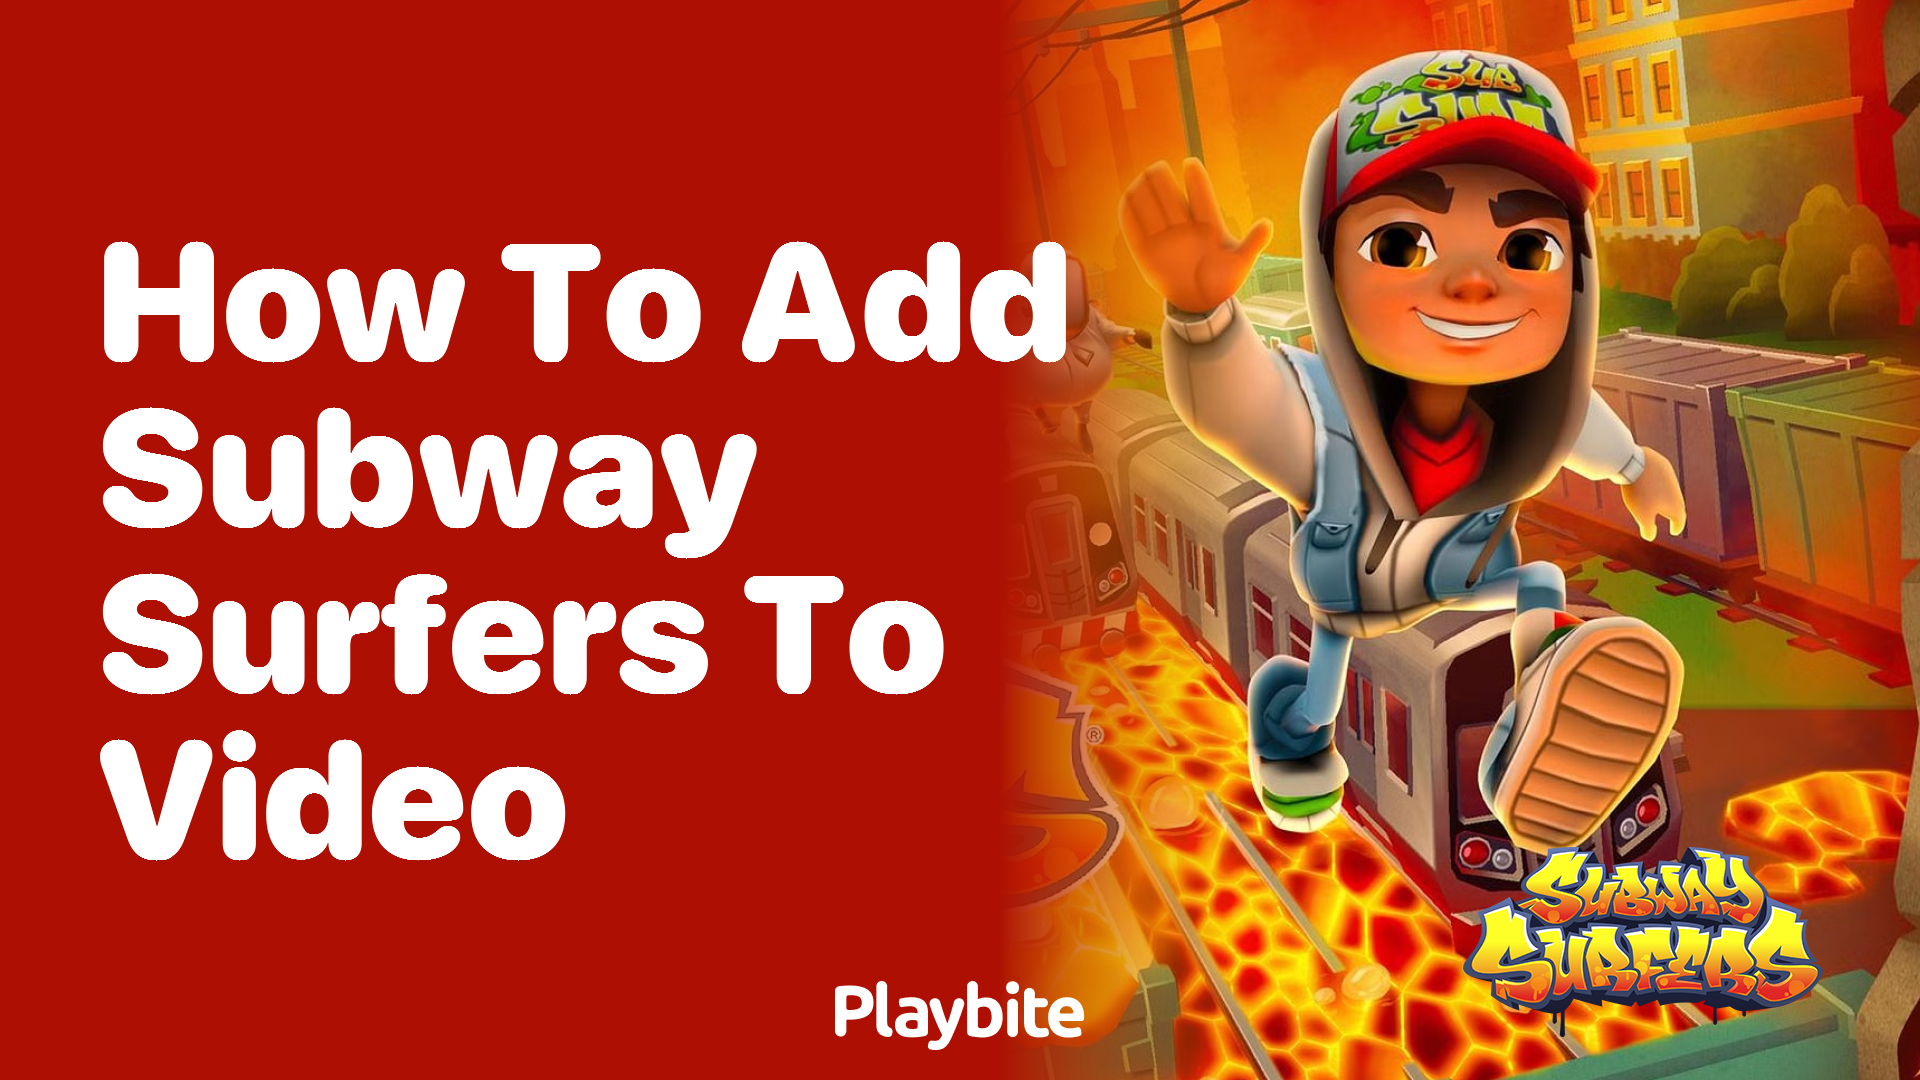 How to Add Subway Surfers to Video